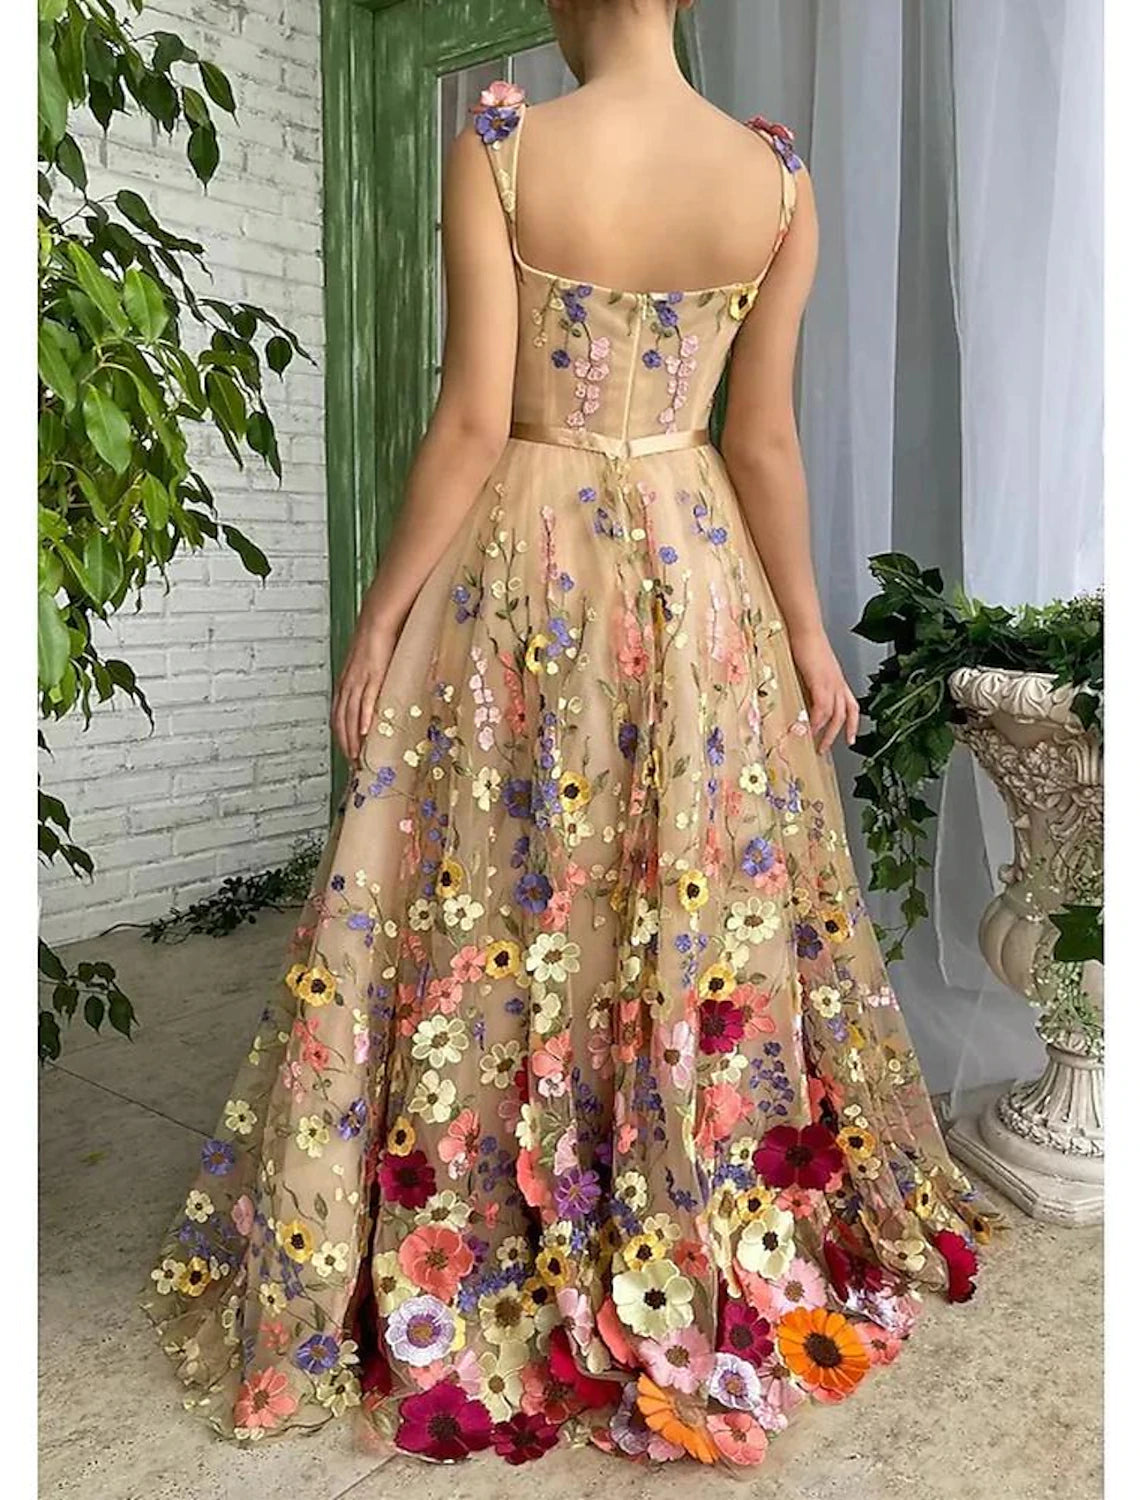 A-Line Prom Dresses Celebrity Style Dress Formal Wedding Guest Floor Length Sleeveless Spaghetti Strap Lace with Floral Print Appliques Shouder Flower